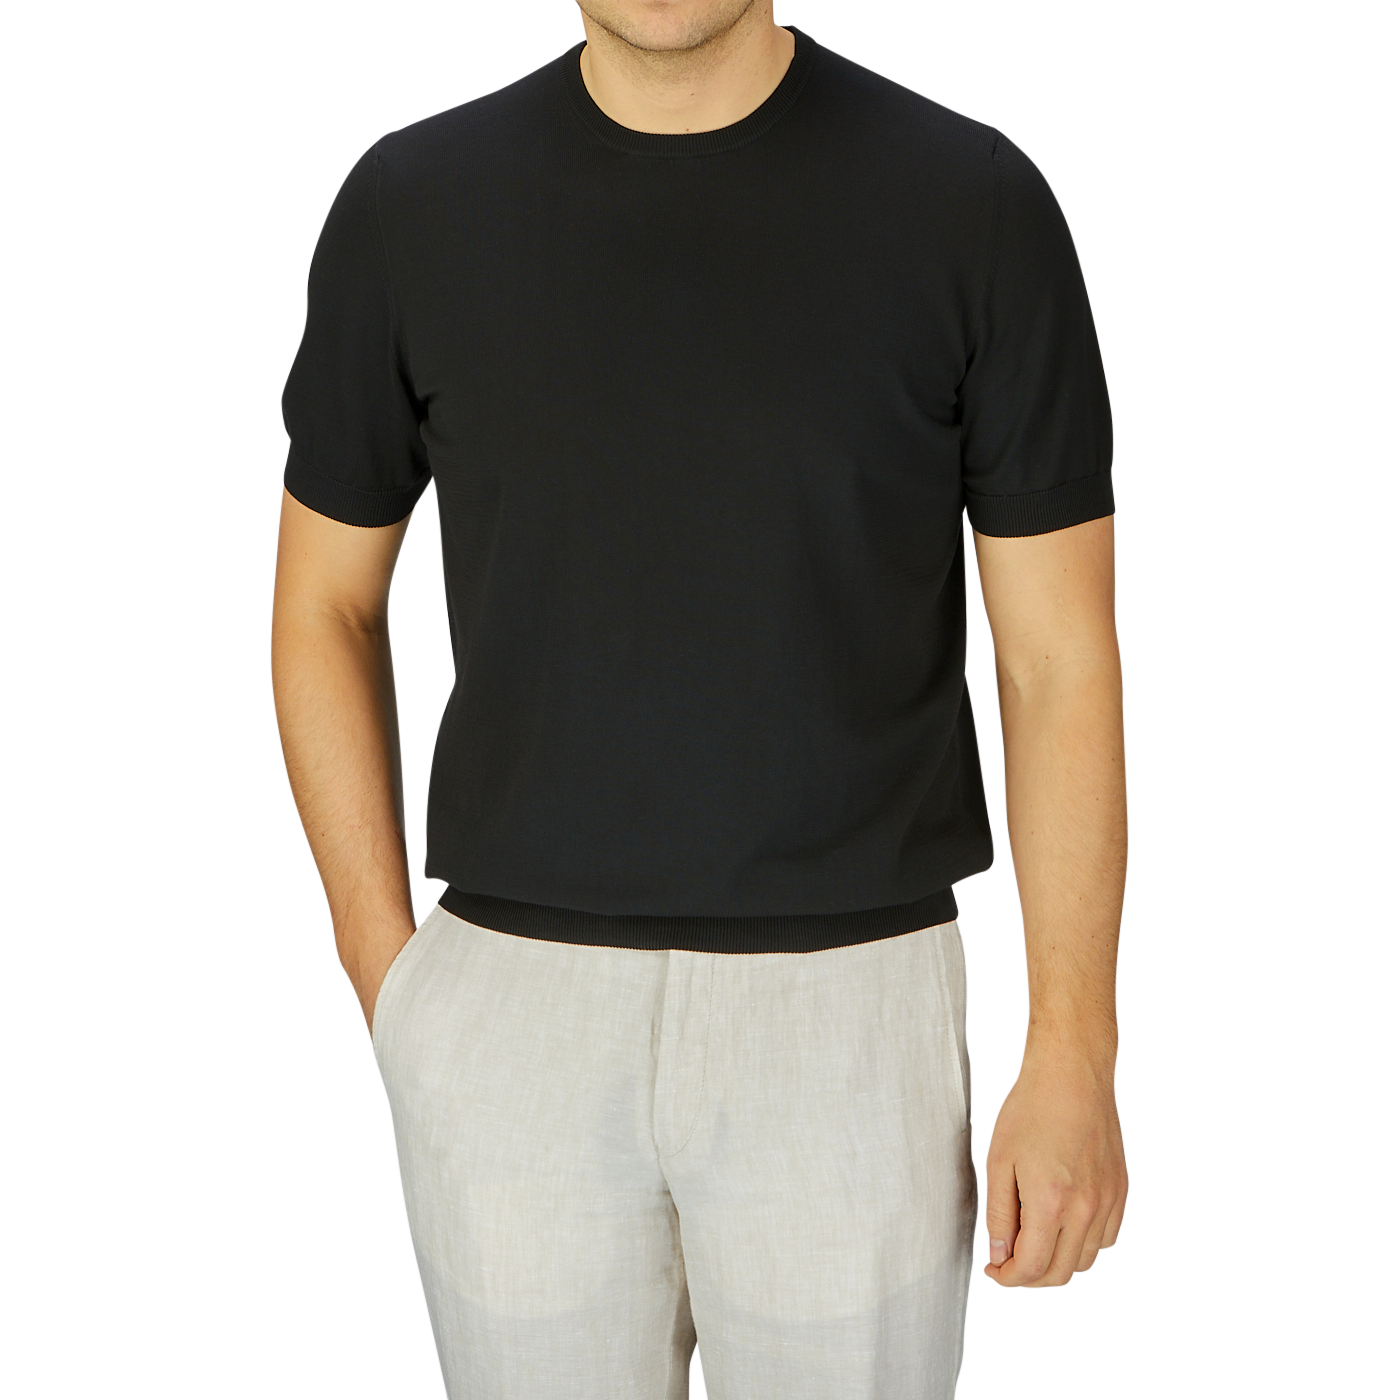 Man wearing a Gran Sasso black organic cotton t-shirt and light beige pants, standing against a grey background, cropped at neck.